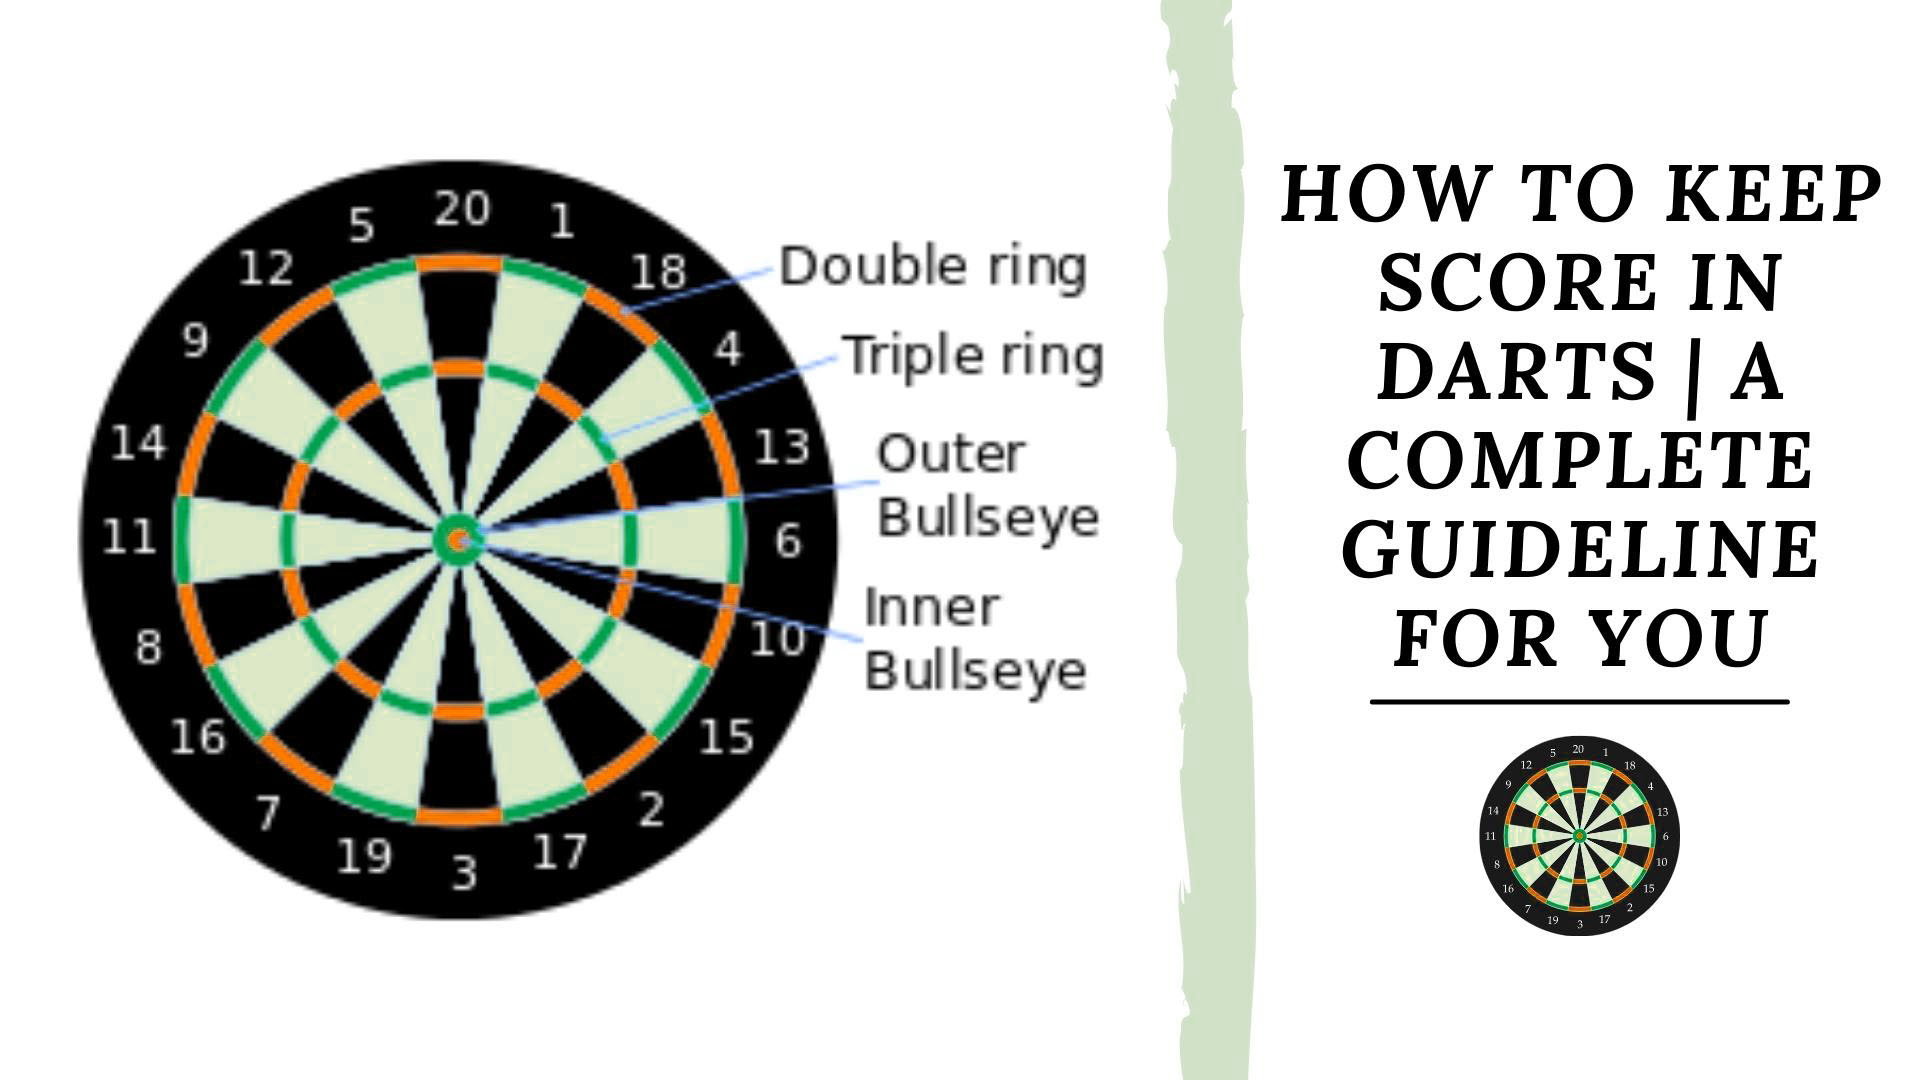 nyhed lave mad fortryde How To Keep Score In Darts | A Complete Guideline For You